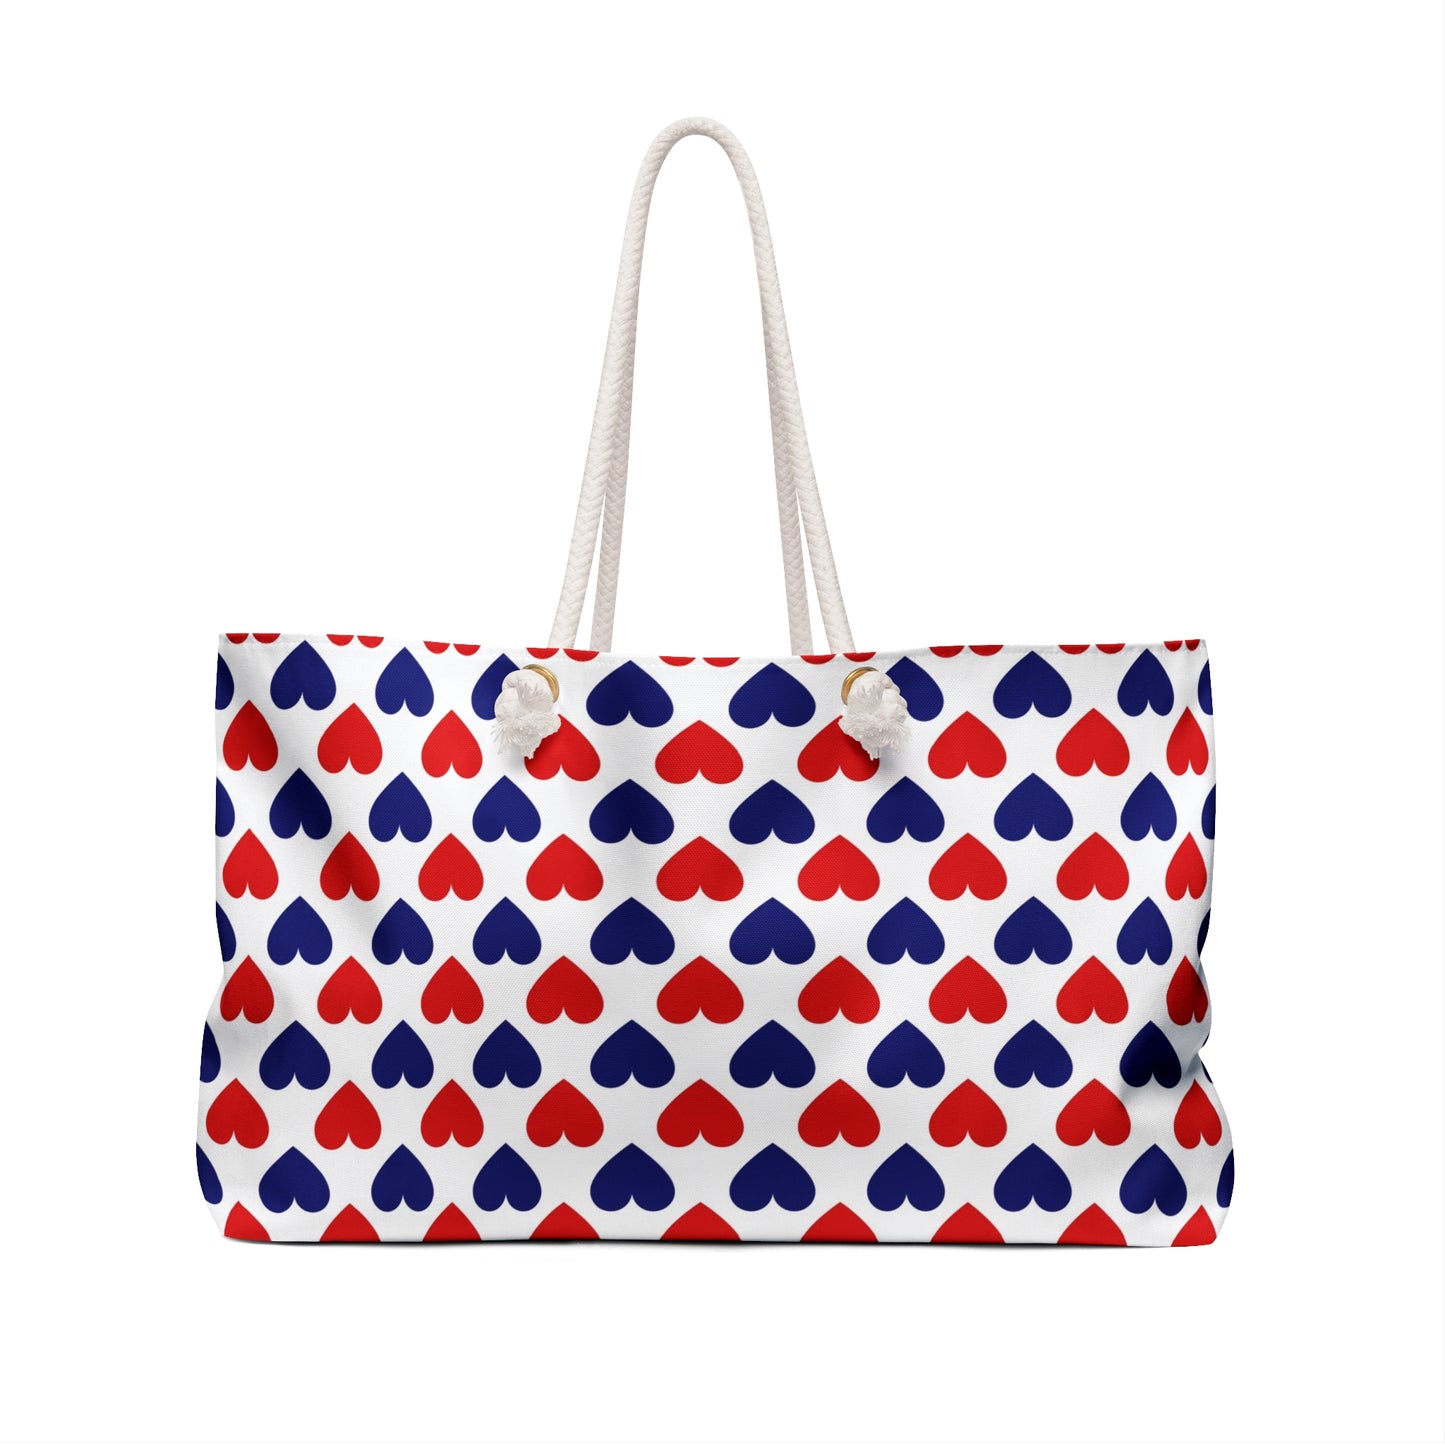 Red/Blue Hearts Tote